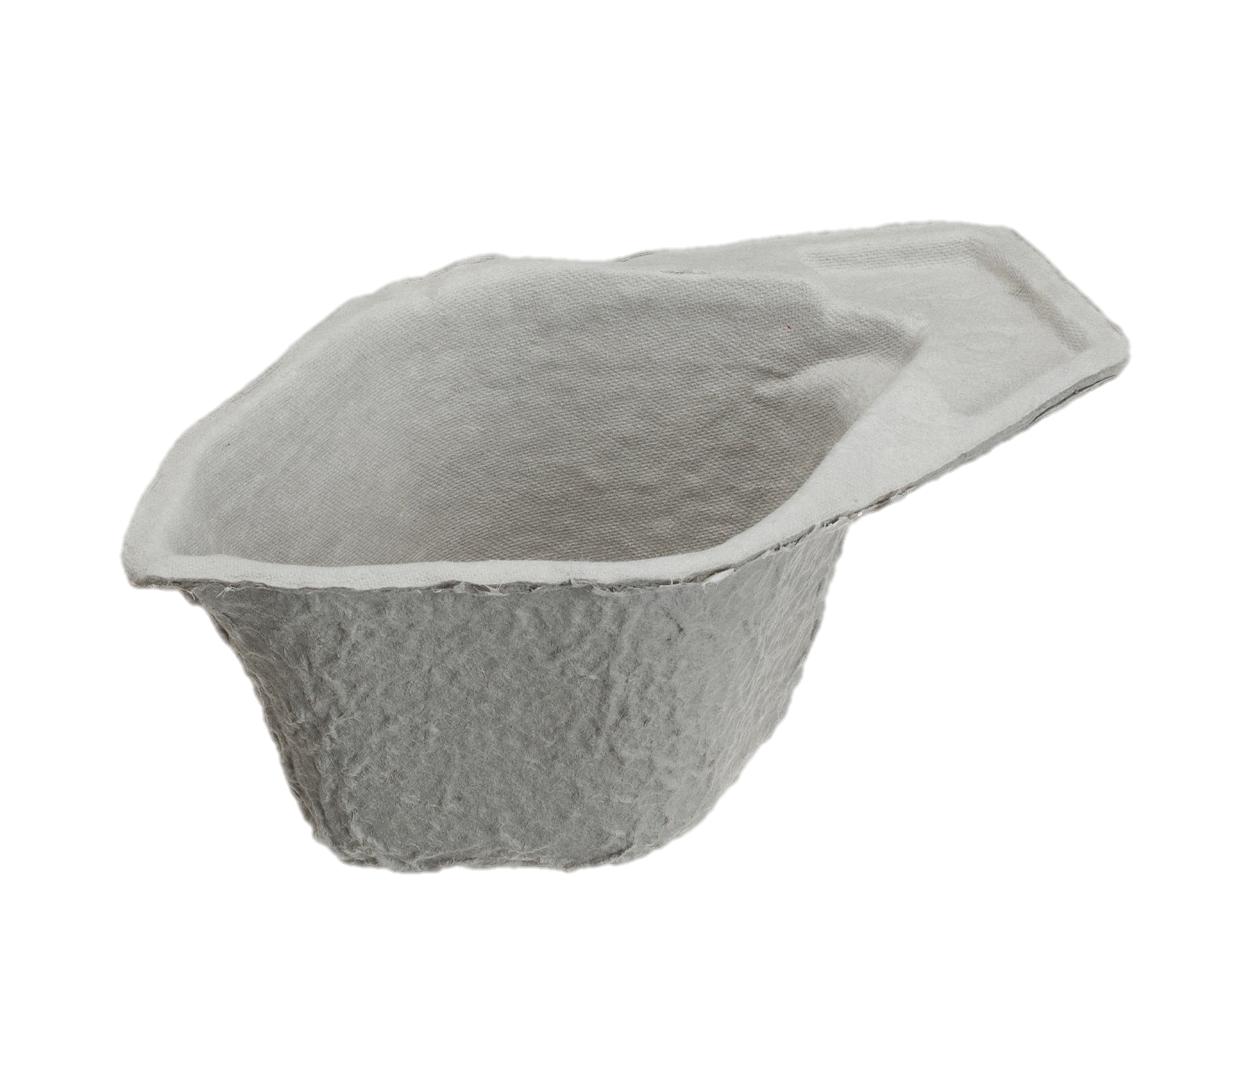 These single-use Multi Cup Sample Containers are constructed with a biodegradable medical-grade pulp made from 100% recycled newsprint and ideal for handling fluid volumes up to 300mL.